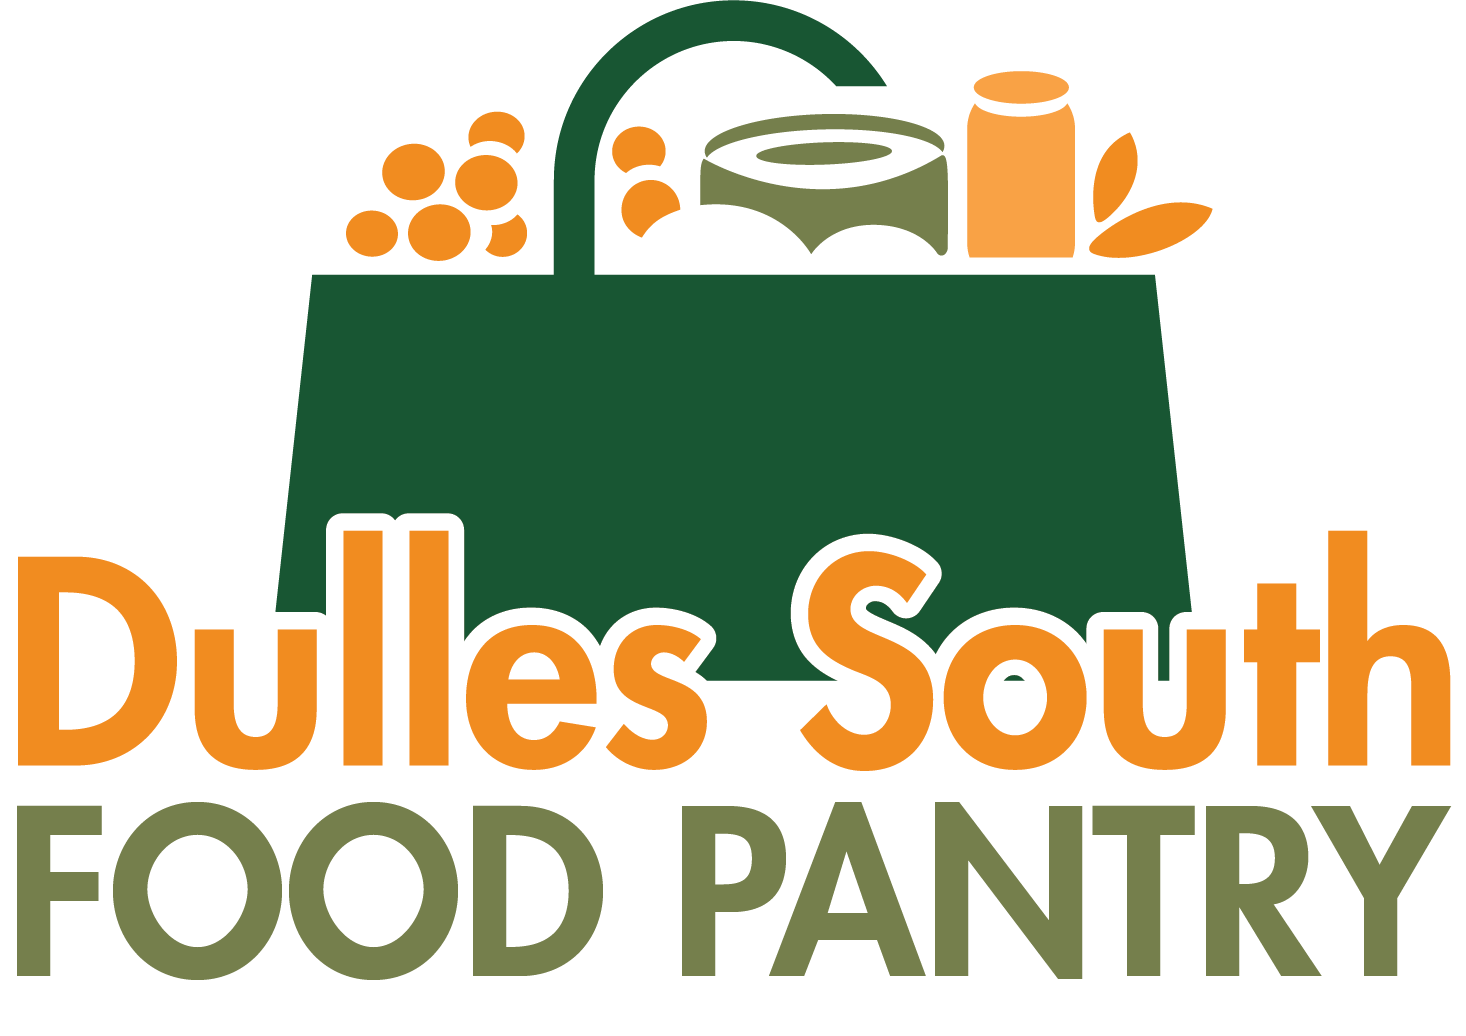 Dulles South Food Pantry ®